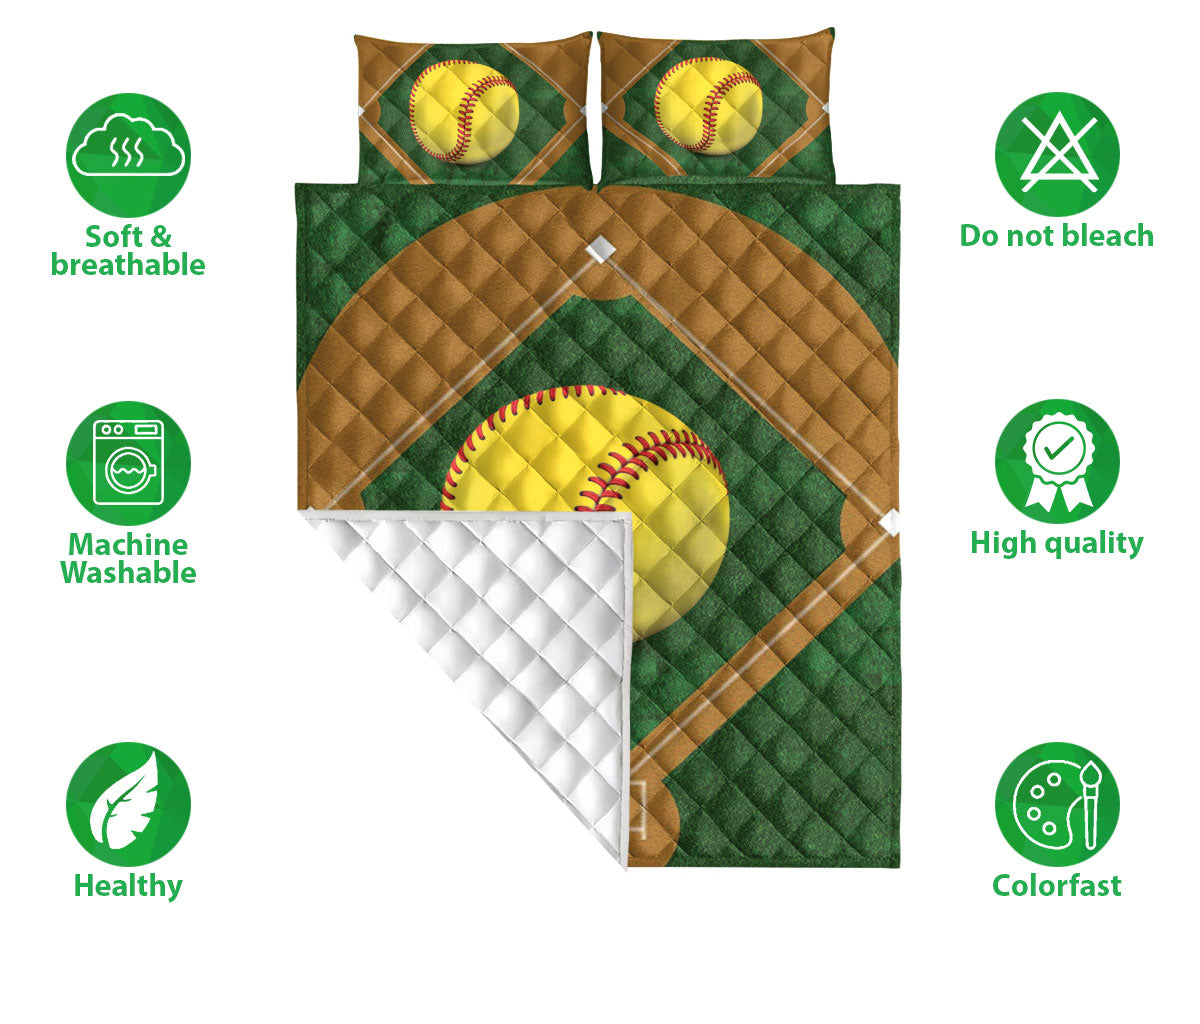 Ohaprints-Quilt-Bed-Set-Pillowcase-Softball-Ball-Field-Unique-Gift-For-Sports-Lover-Men-Women-Friend-Kids-Blanket-Bedspread-Bedding-848-Double (70'' x 80'')